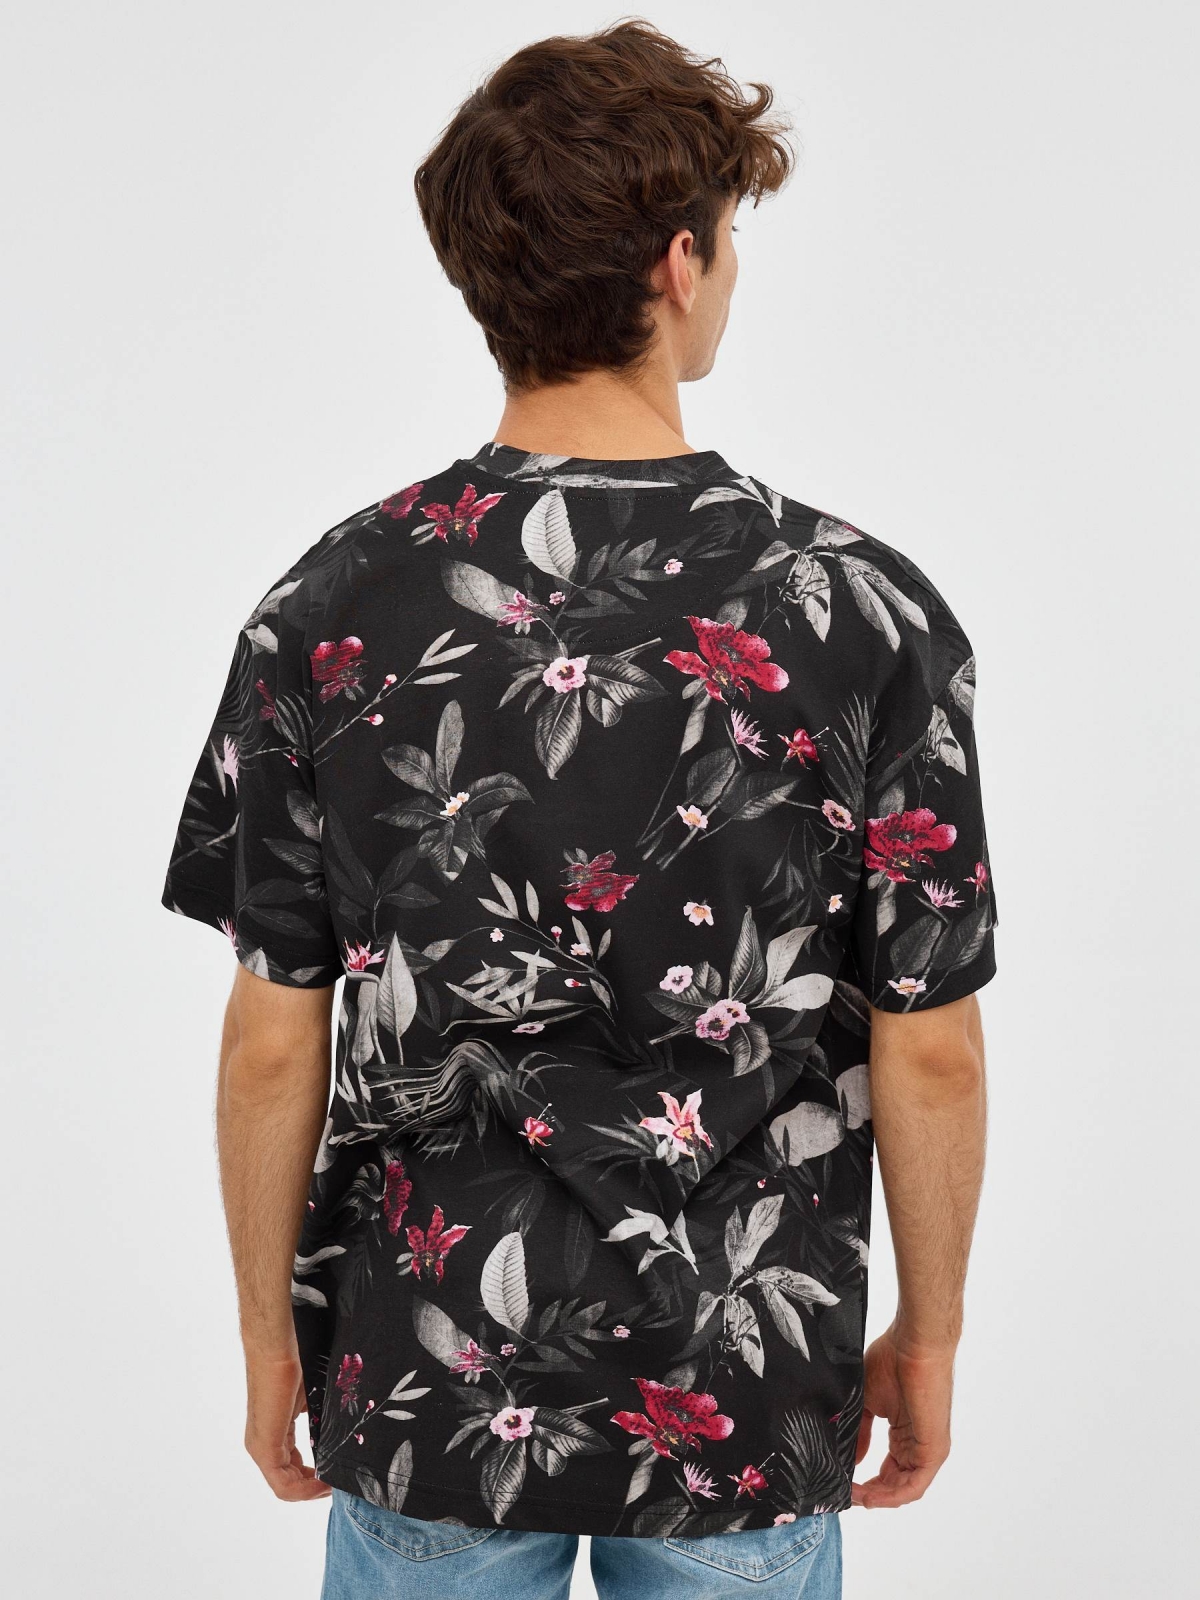 Oversized floral t-shirt black middle back view